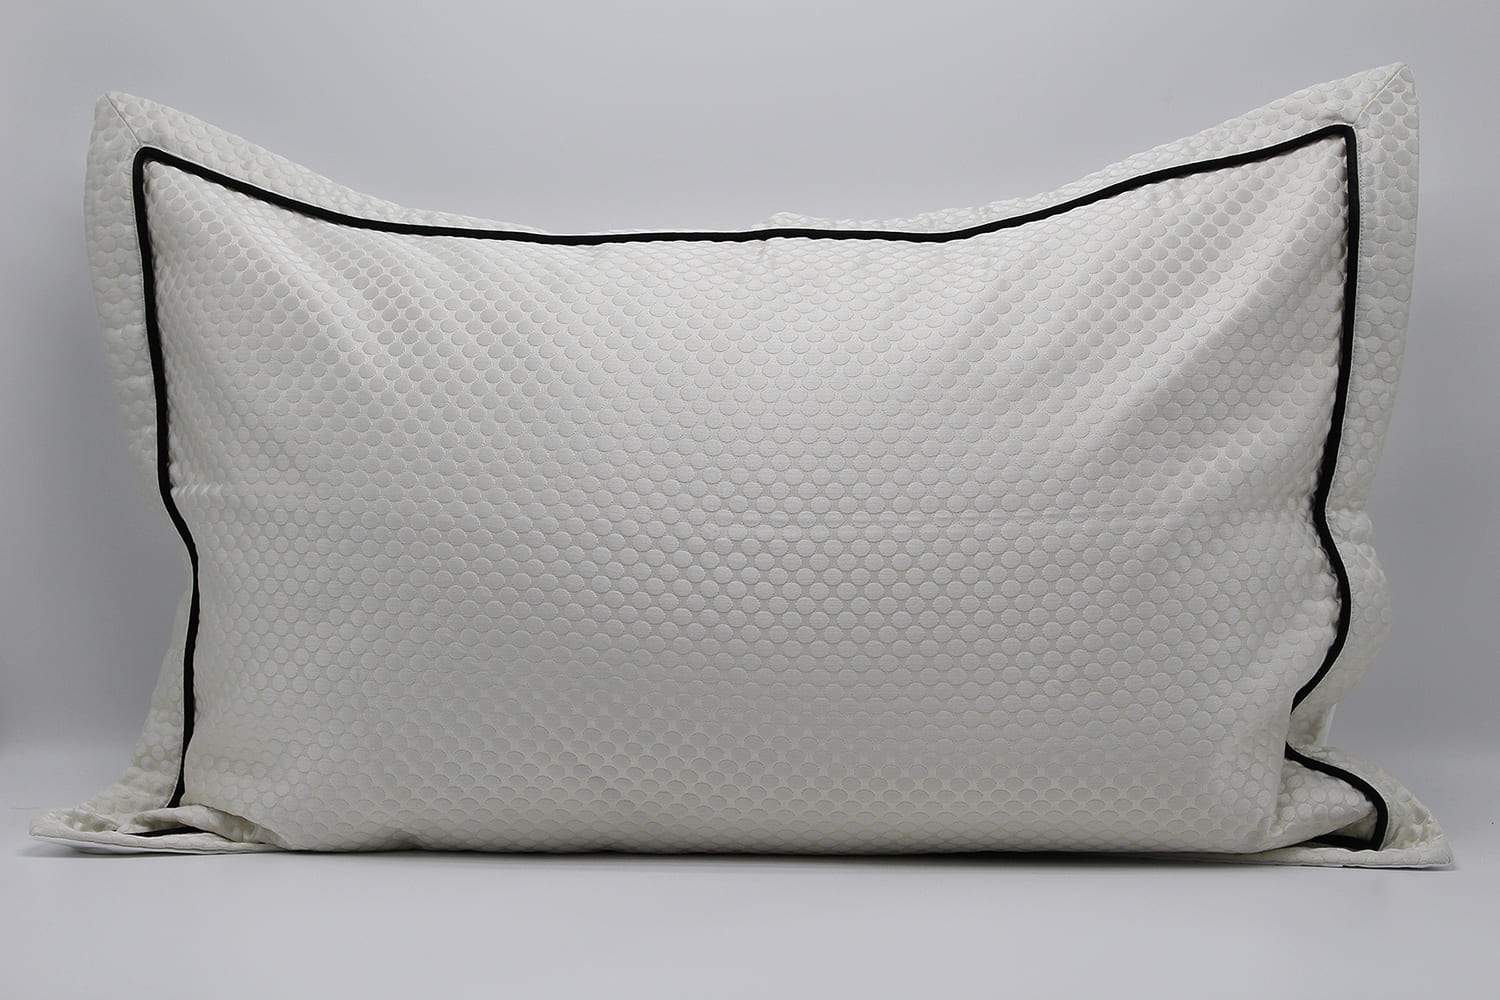 BLACK LINE BEAUTIFUL WHITE  PILLOWS- ANGIE HOMES ANGIE HOMES